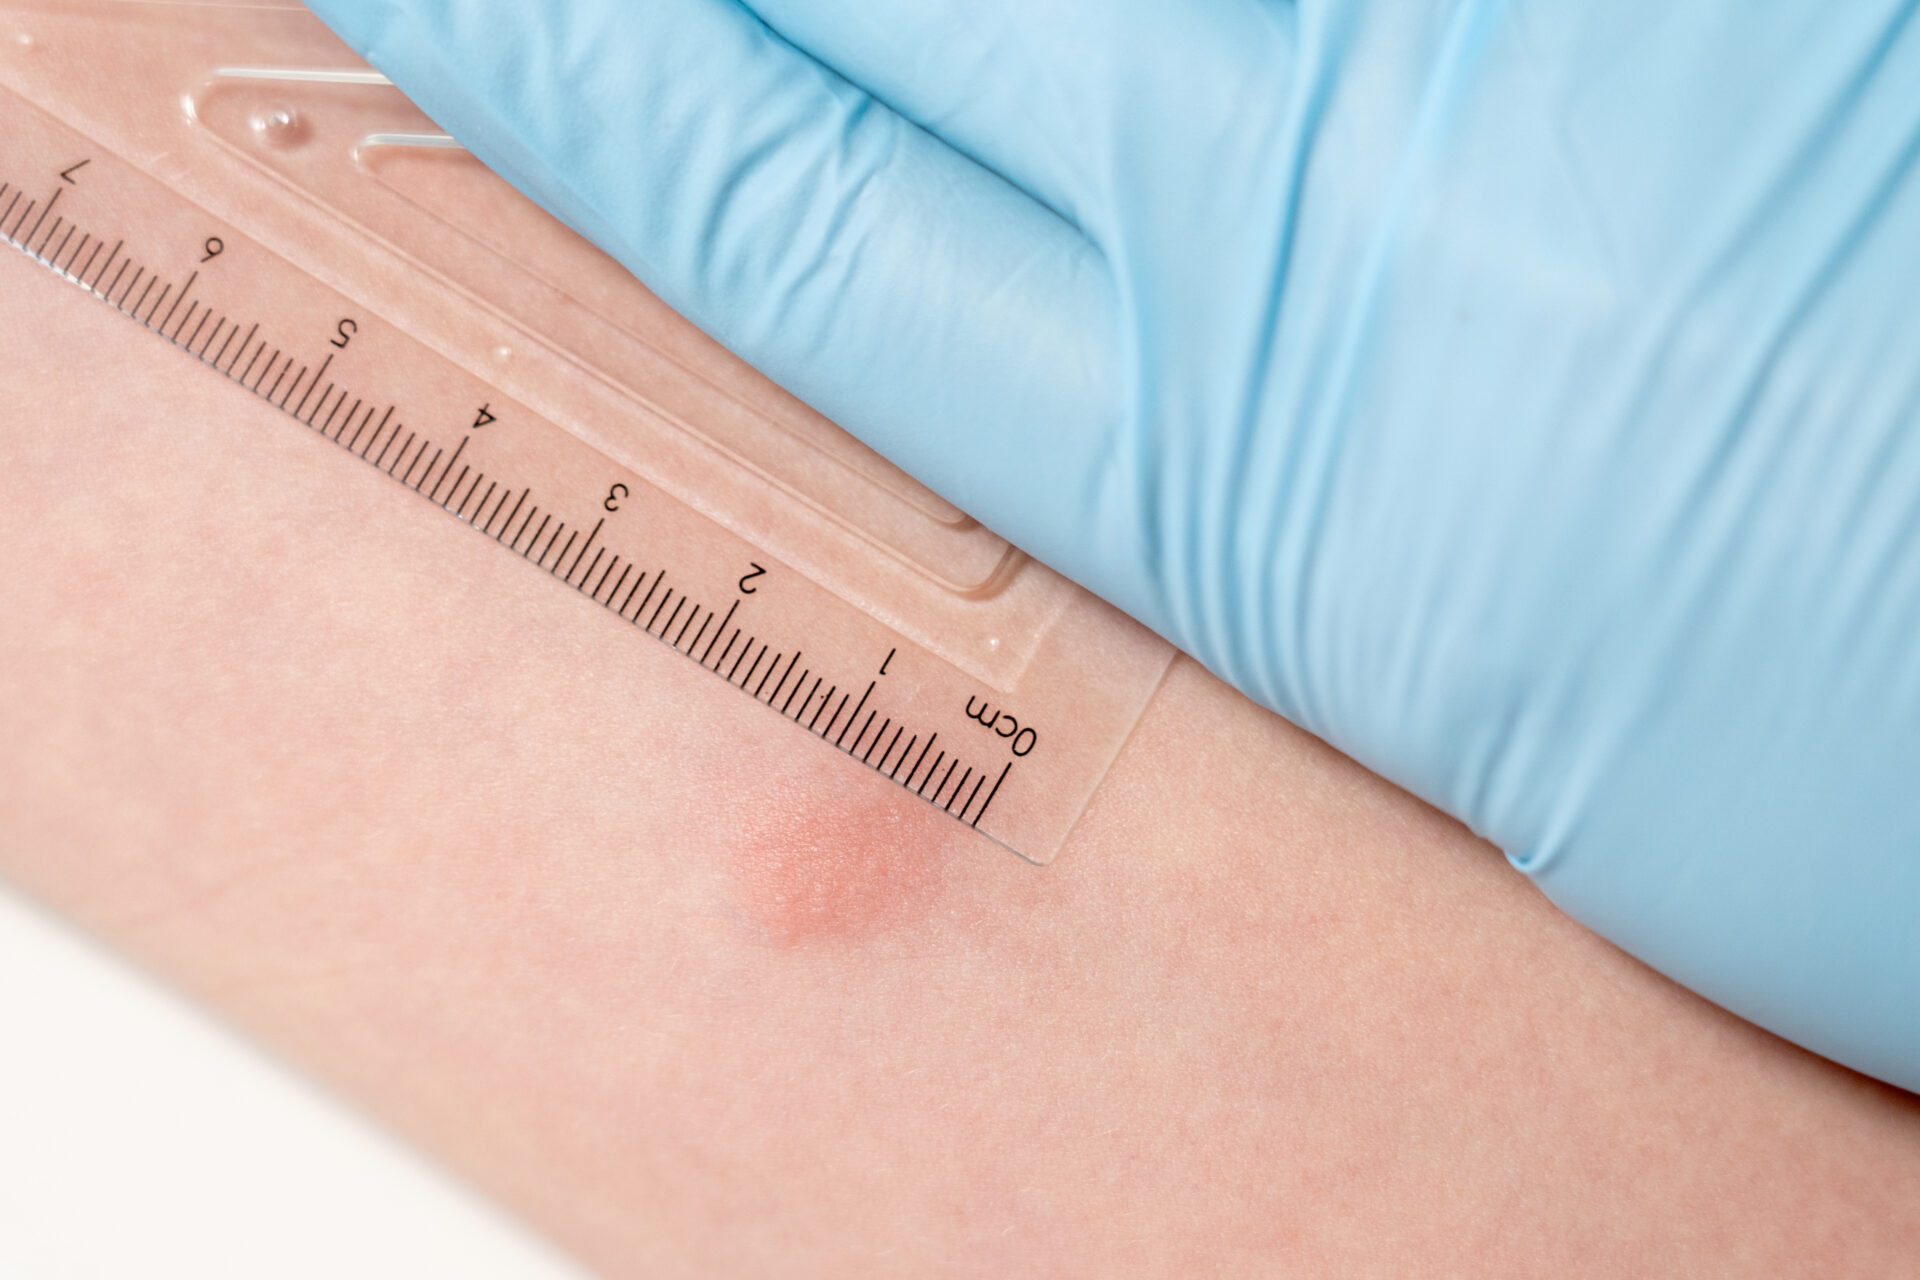 Measurement of tuberculosis test on an arm